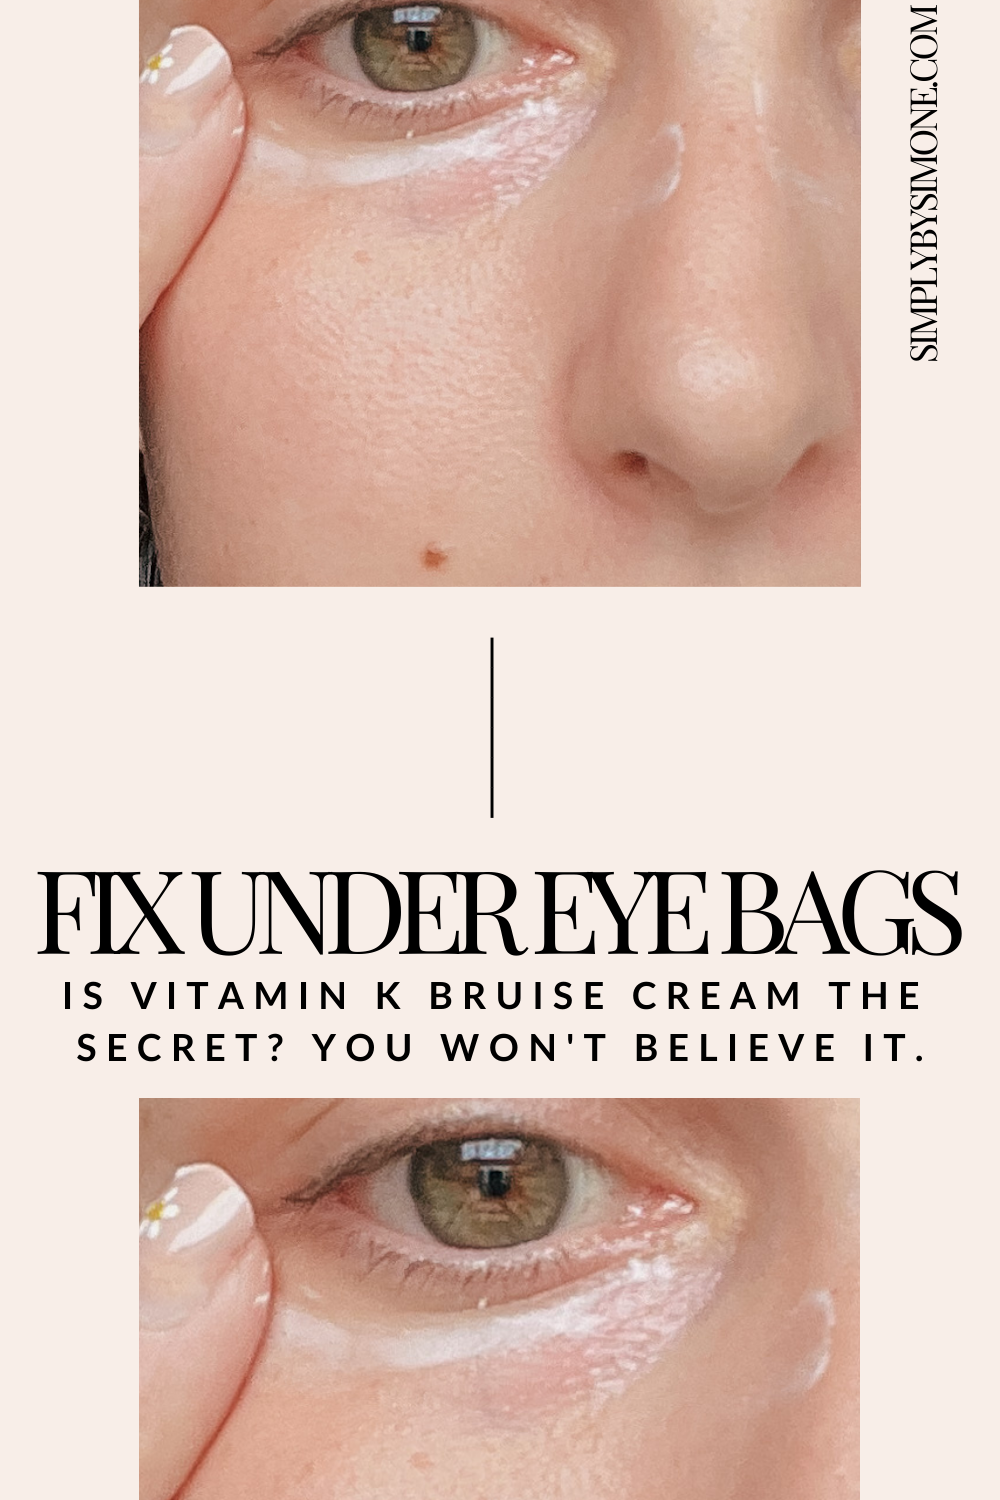 Will Vitamin K Get Rid Of Your Under-Eye Bags? You Won't Believe This